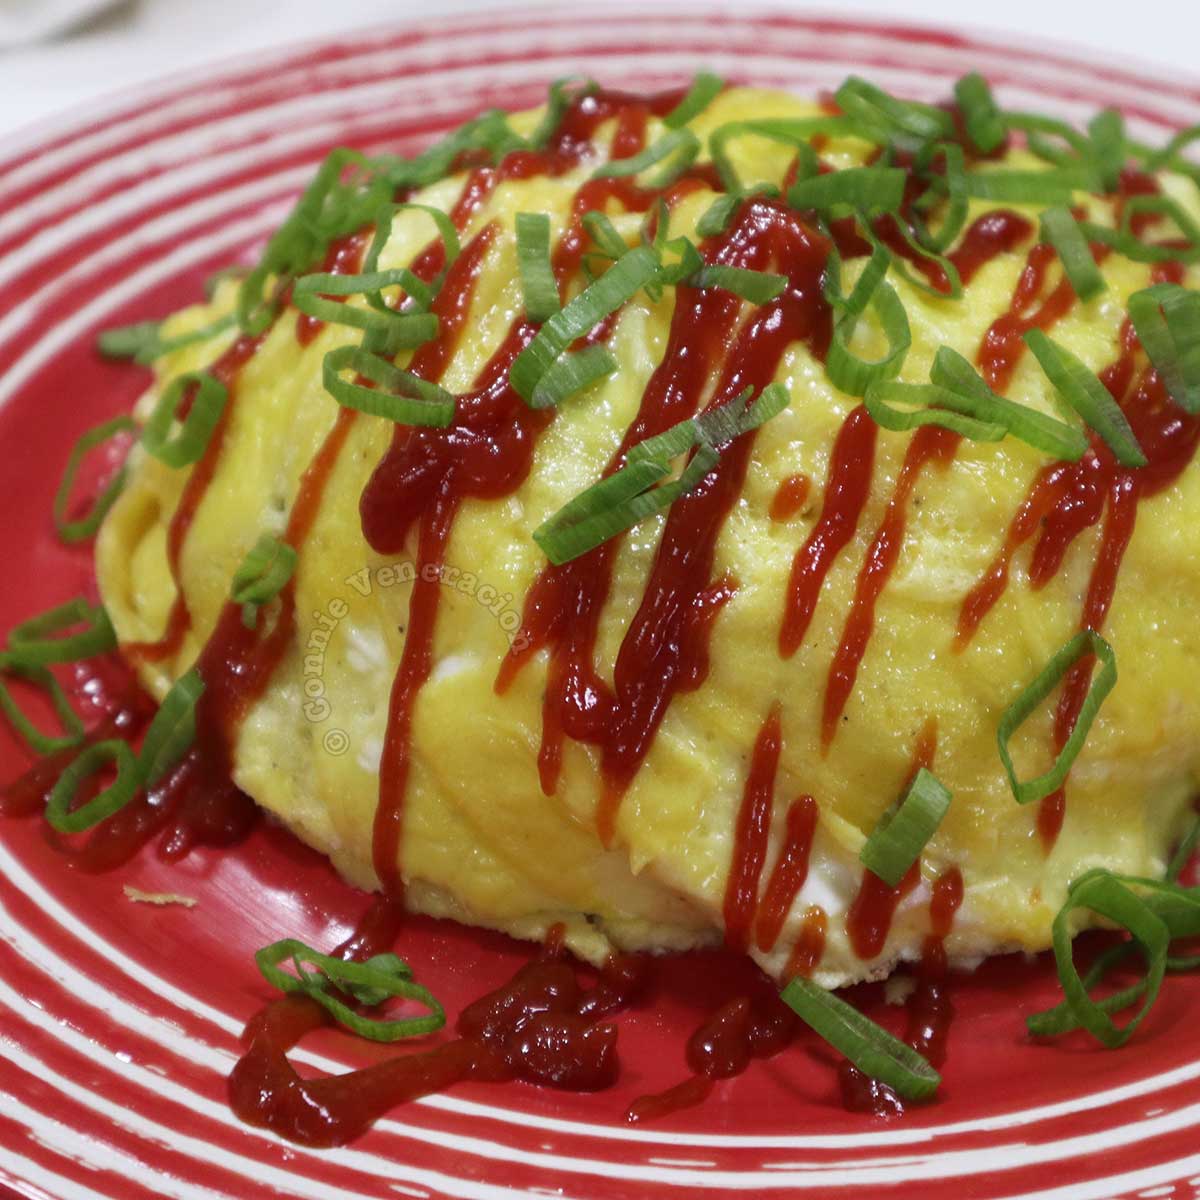 Omurice (omelette rice) drizzled with ketchup and sprinkled with scallions